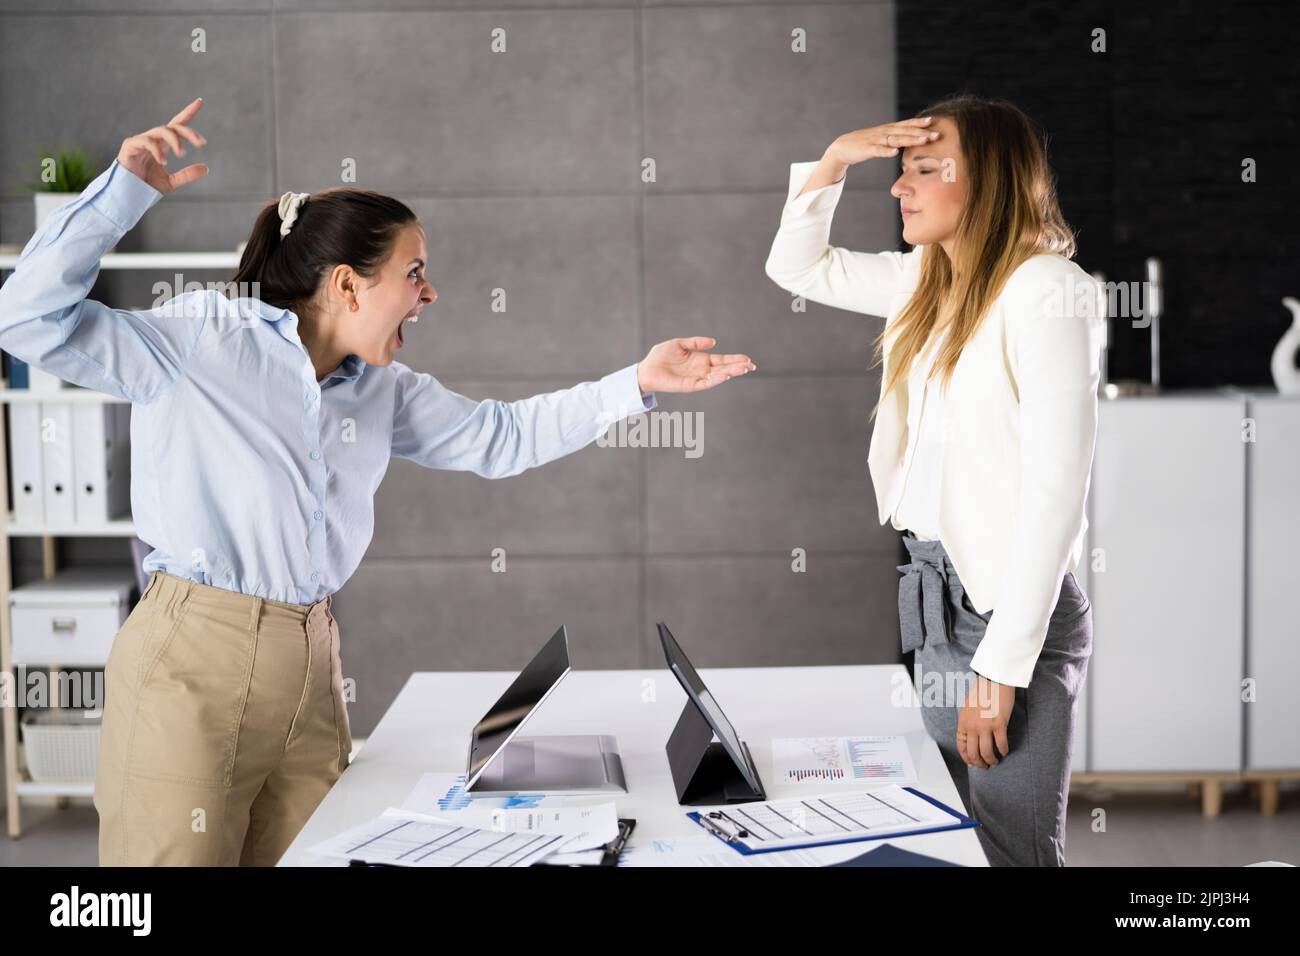 Office Quarrel. Worker Women Fighting Each Other Stock Photo